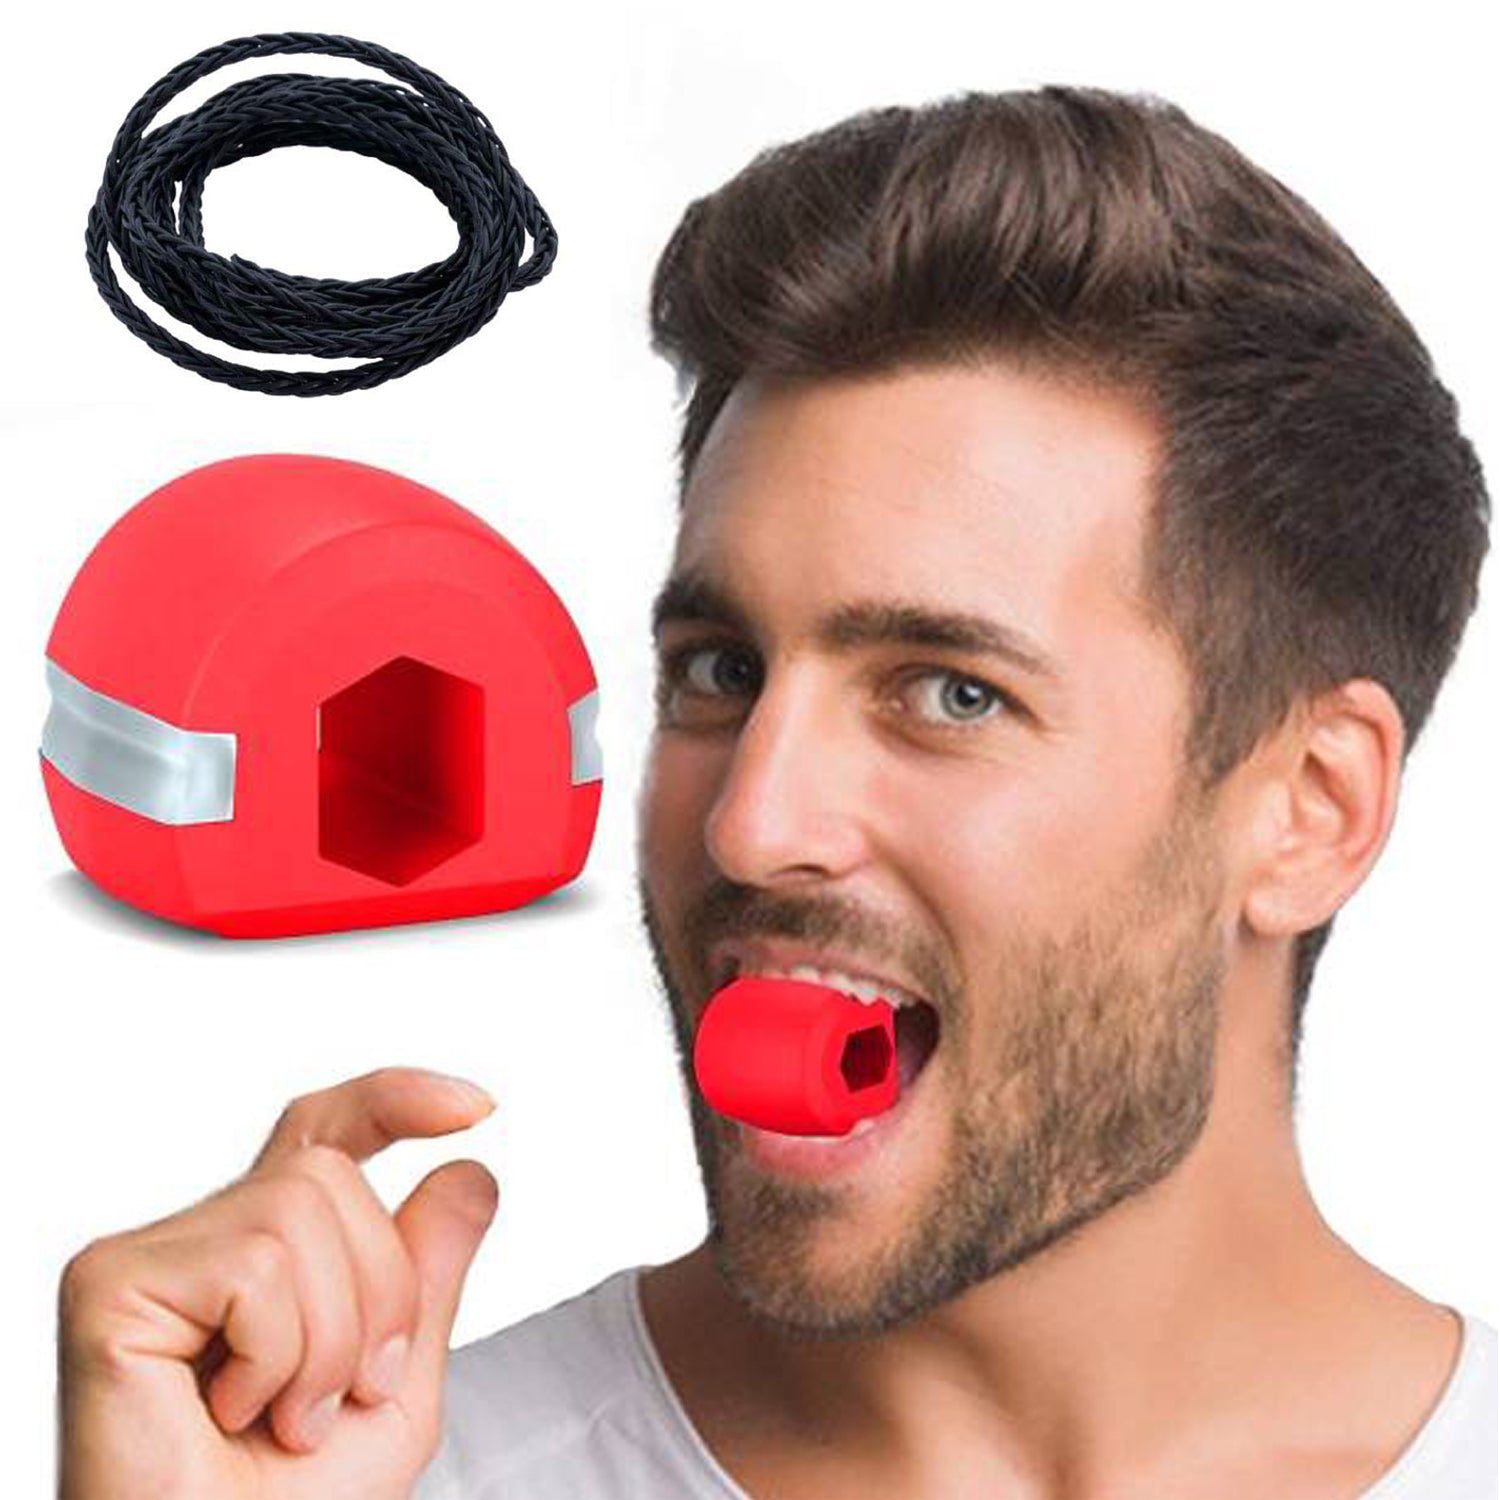 6101V Jawline Exerciser Jaw, Face, and Neck Exerciser, Slim and Tone Your Face, Jaw Exerciser For Men & Women, Neck Toning, Facial Exerciser (Red color) freeshipping - DeoDap